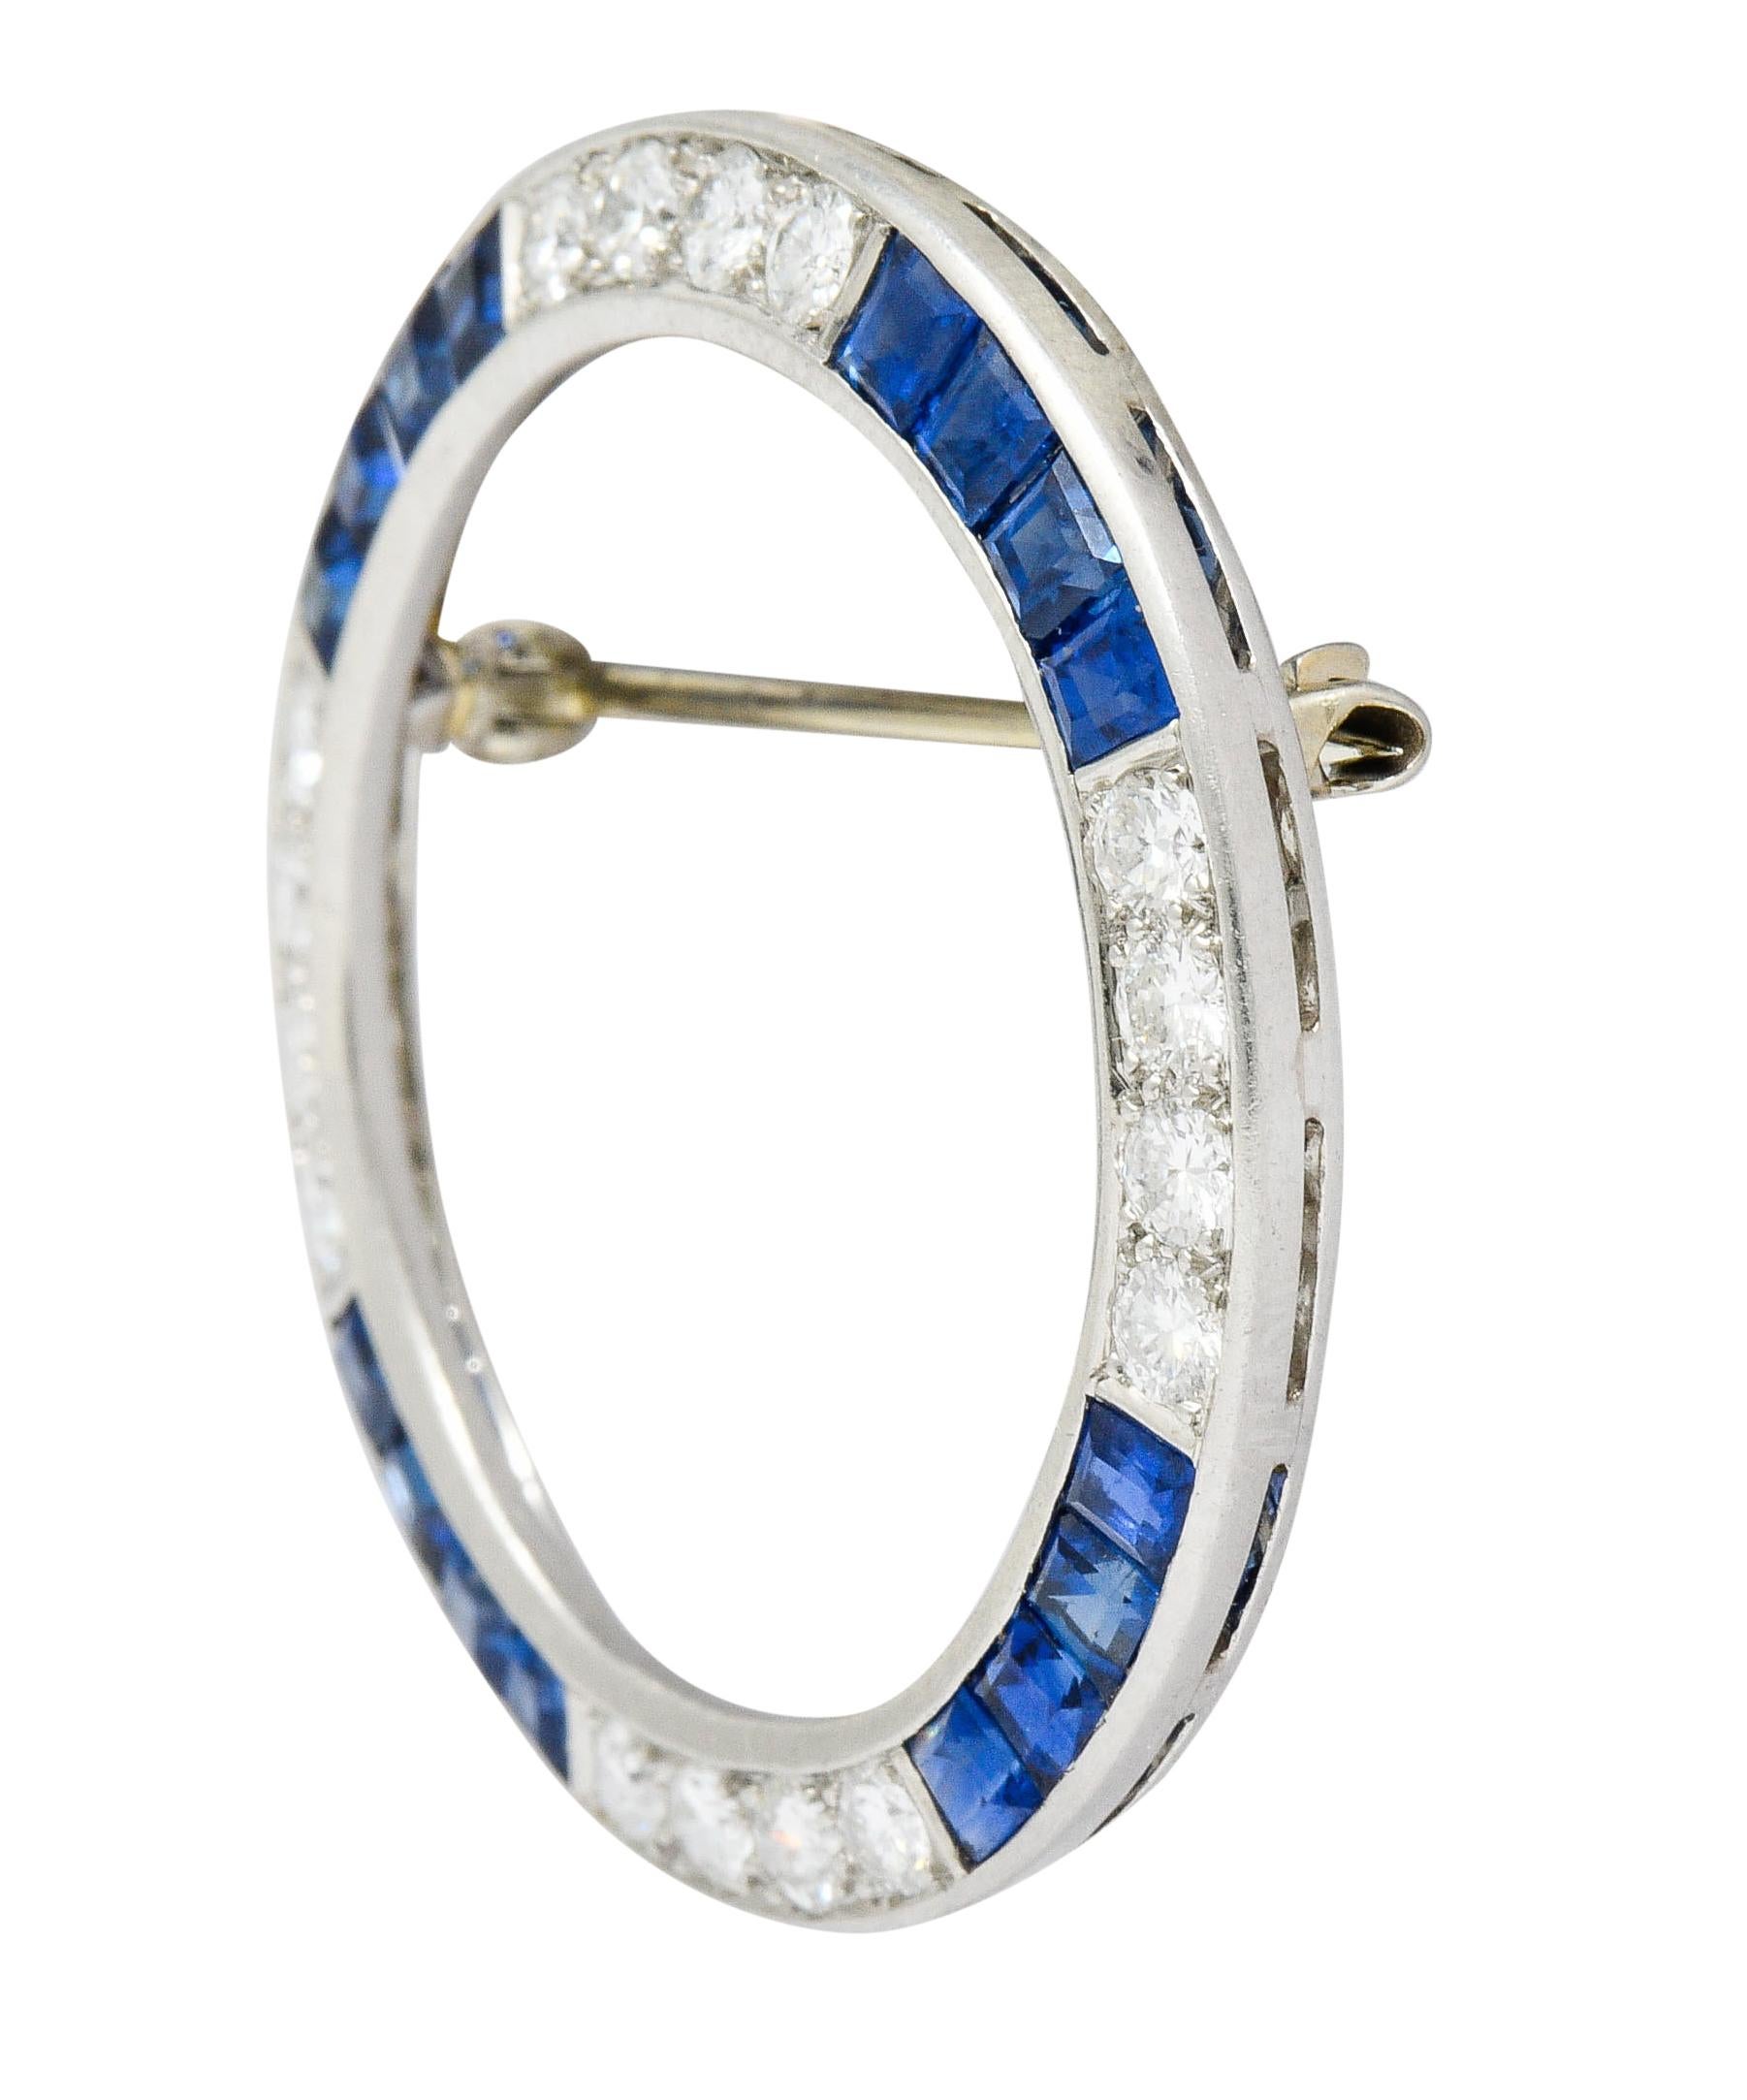 Circular brooch is designed as sections of channel set calibrè cut sapphire alternating with bead set round brilliant cut diamonds

Sapphires are a very well-matched bright blue color and weigh in total approximately 3.05 carats

Diamonds weigh in